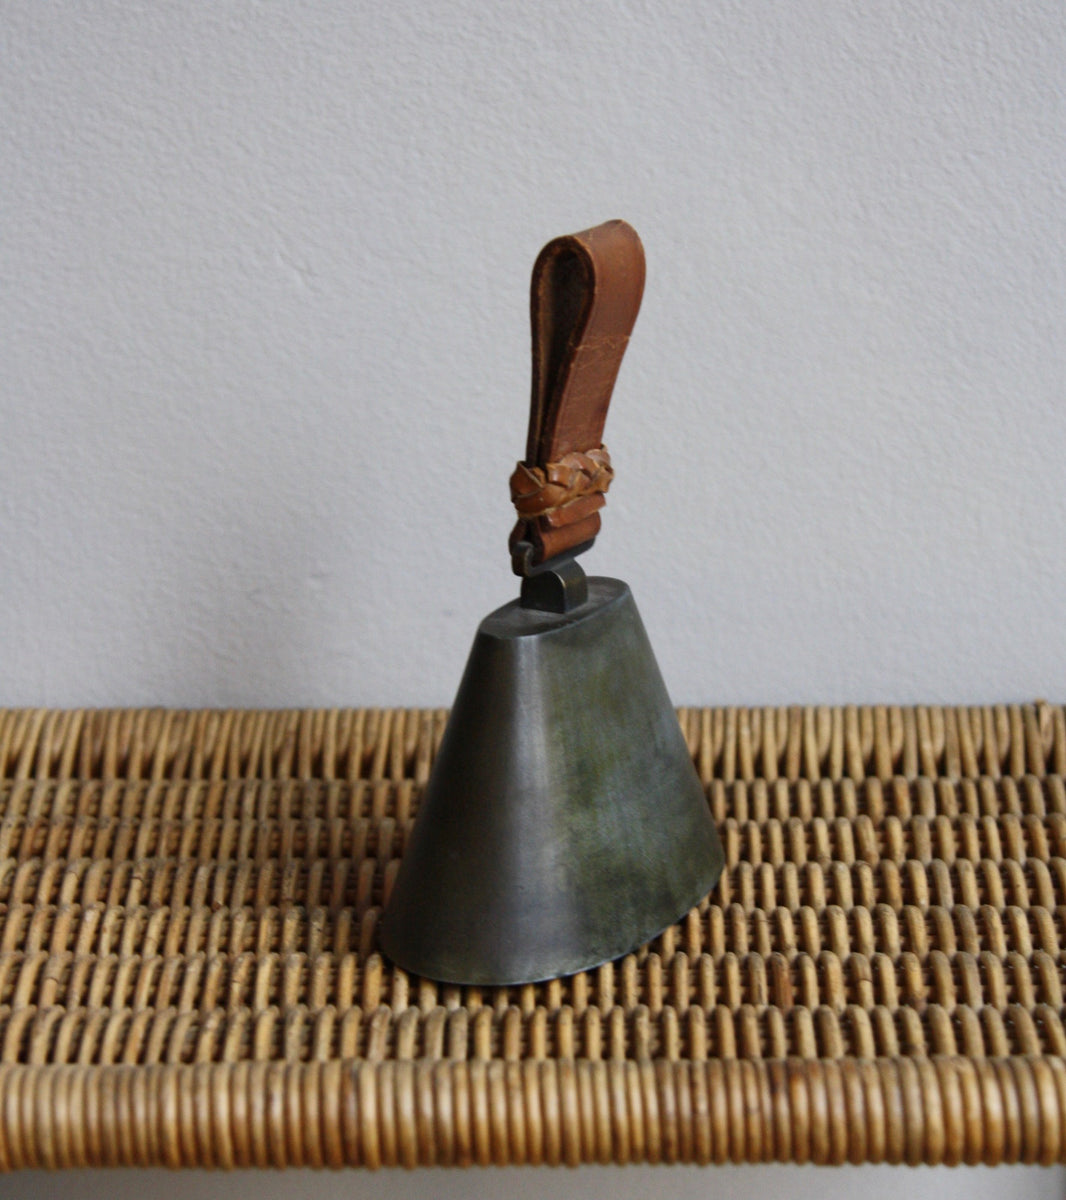 Modernist Design of a Brass Bell With Leather Handle Carl Auböck - Image 5